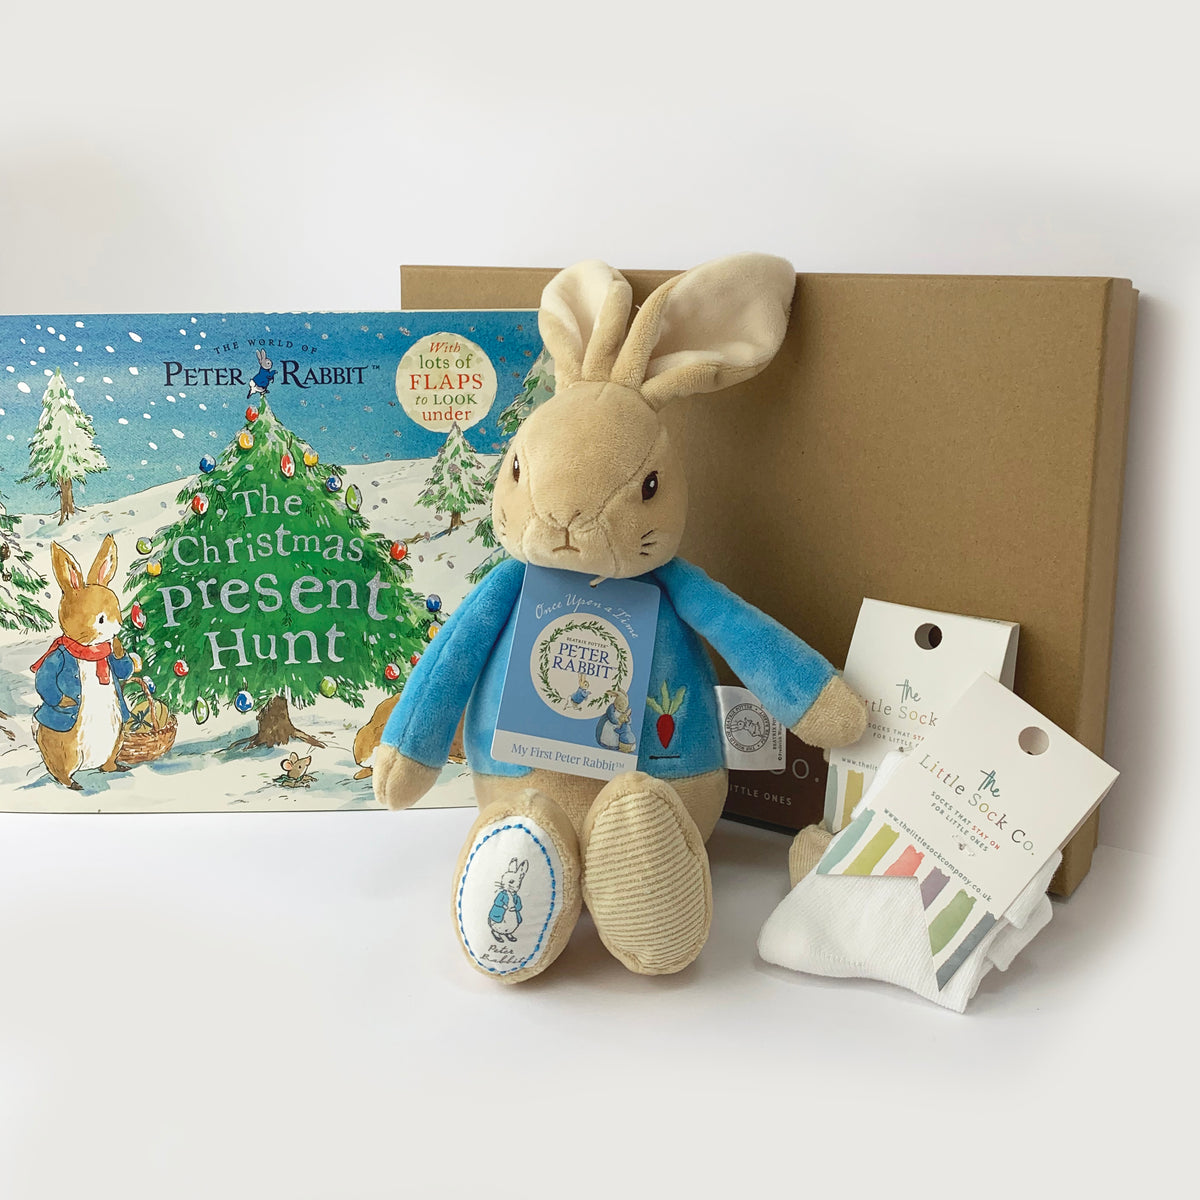 Peter Rabbit Christmas Gift Set - Soft Cuddly Toy and Book for Baby and Toddler